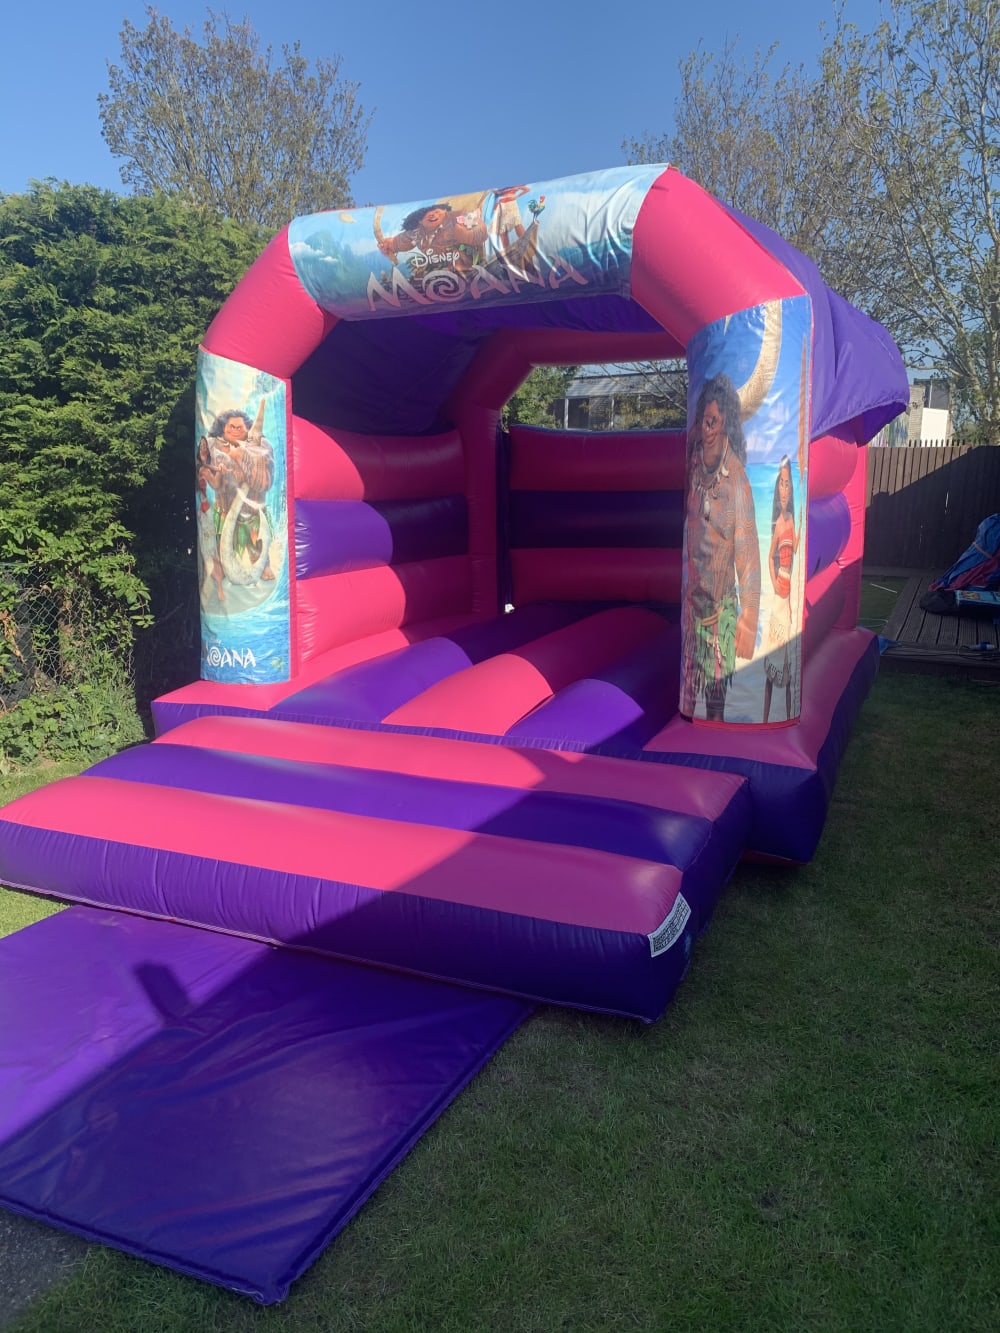 Moana Bouncy Castle Pink 15x12 Bouncy Castle Soft Play Hire In Chelmsford Maldon Southend Rayleigh Billericay Brentwood Braintree